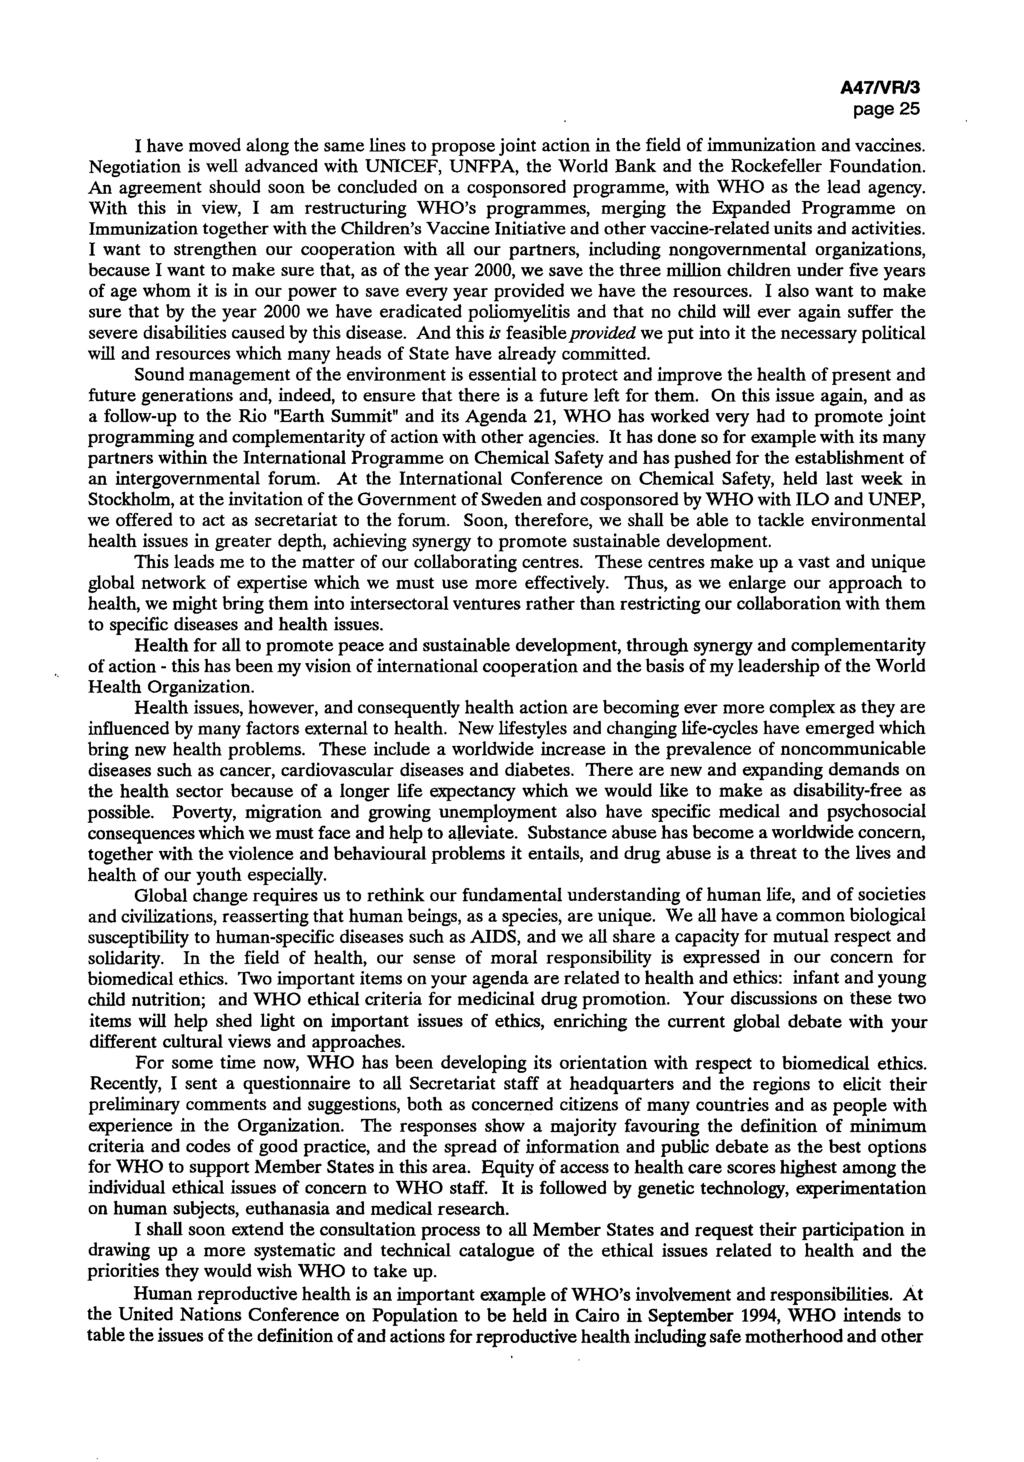 A47/VR/2 page 25 I have moved along the same lines to propose joint action in the field of immunization and vaccines.